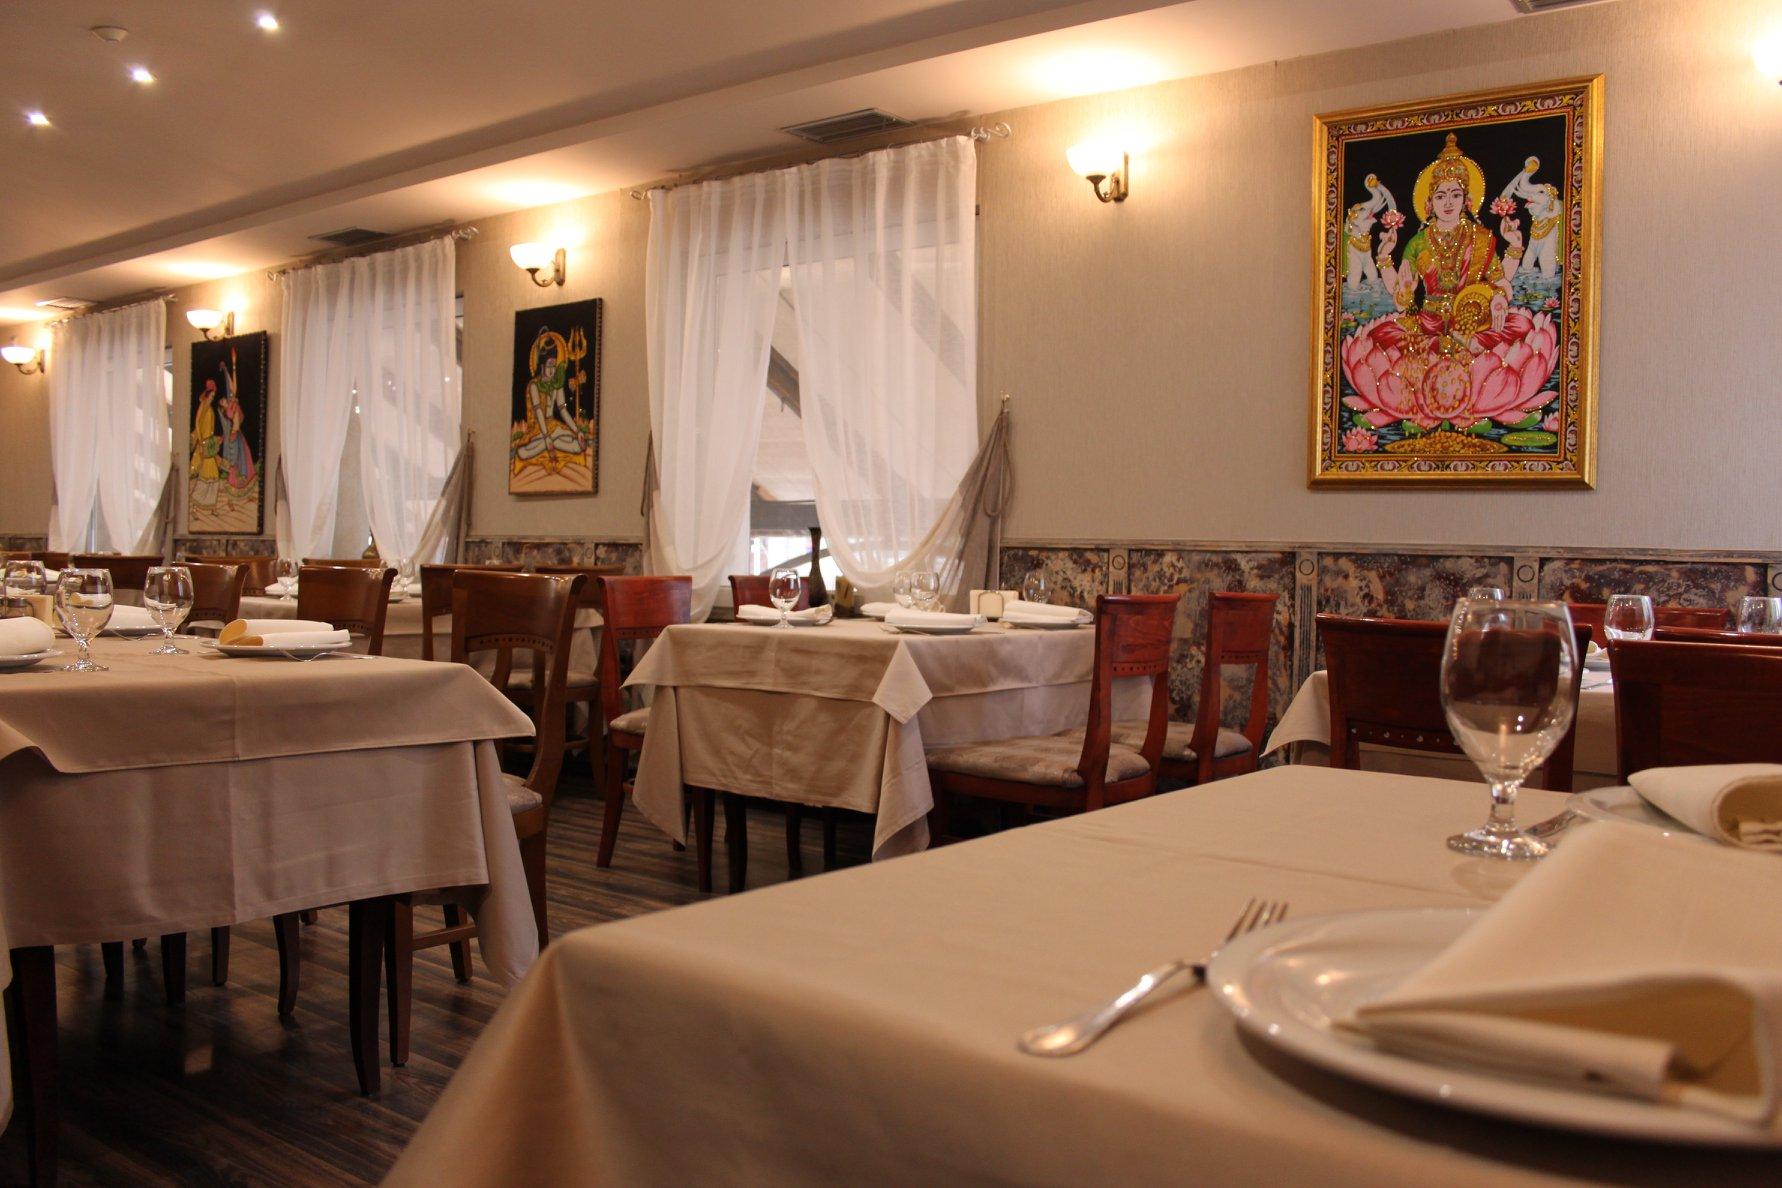 Cover image of this place Indian Restaurant Kohinoor, bulevard "Gotse Delchev", Sofia, Bulgaria